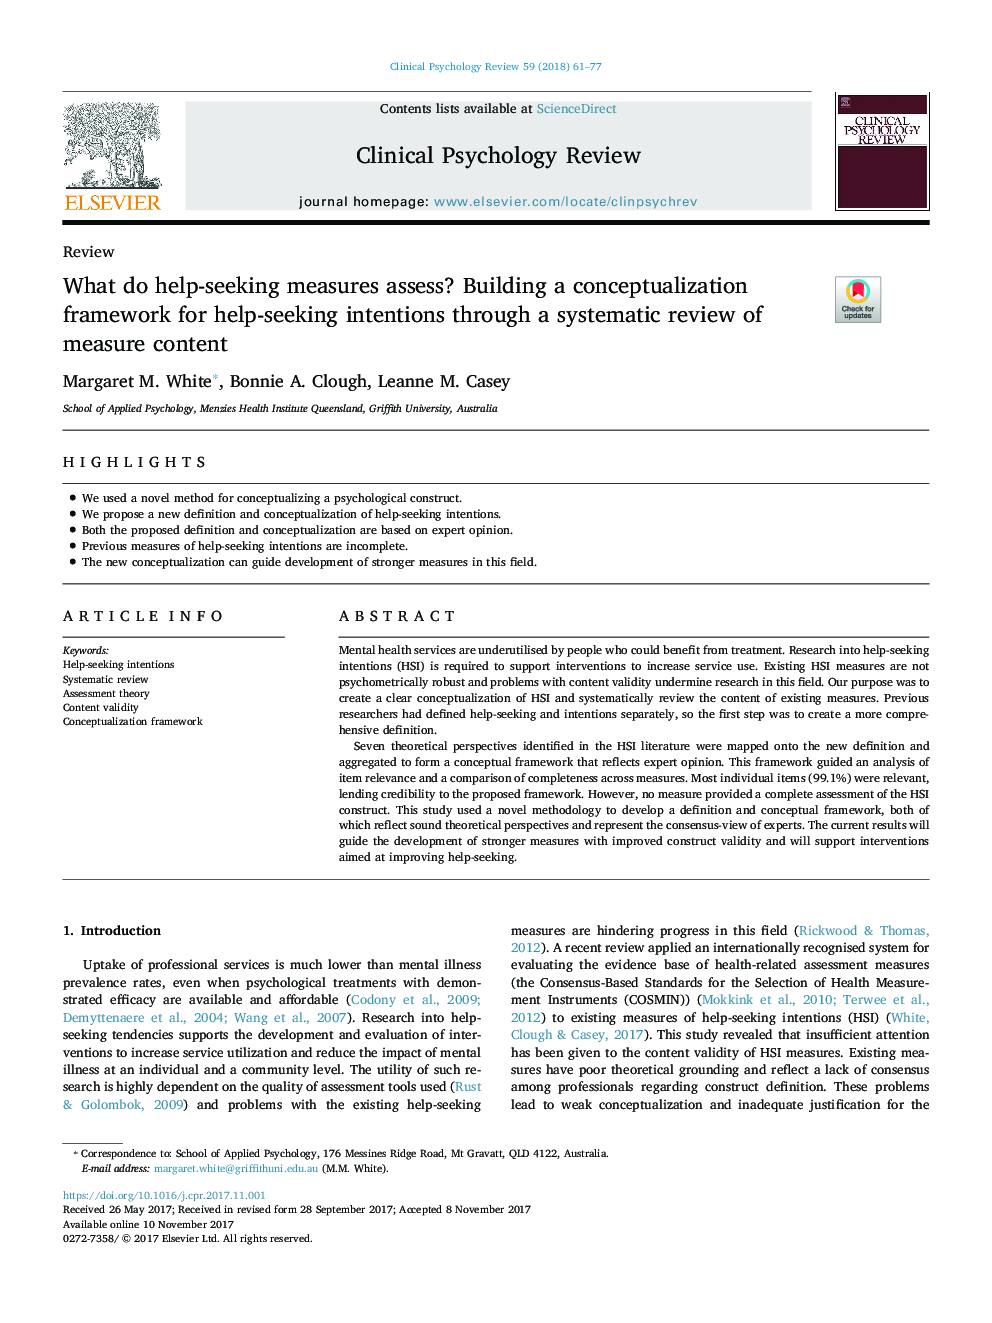 What do help-seeking measures assess? Building a conceptualization framework for help-seeking intentions through a systematic review of measure content